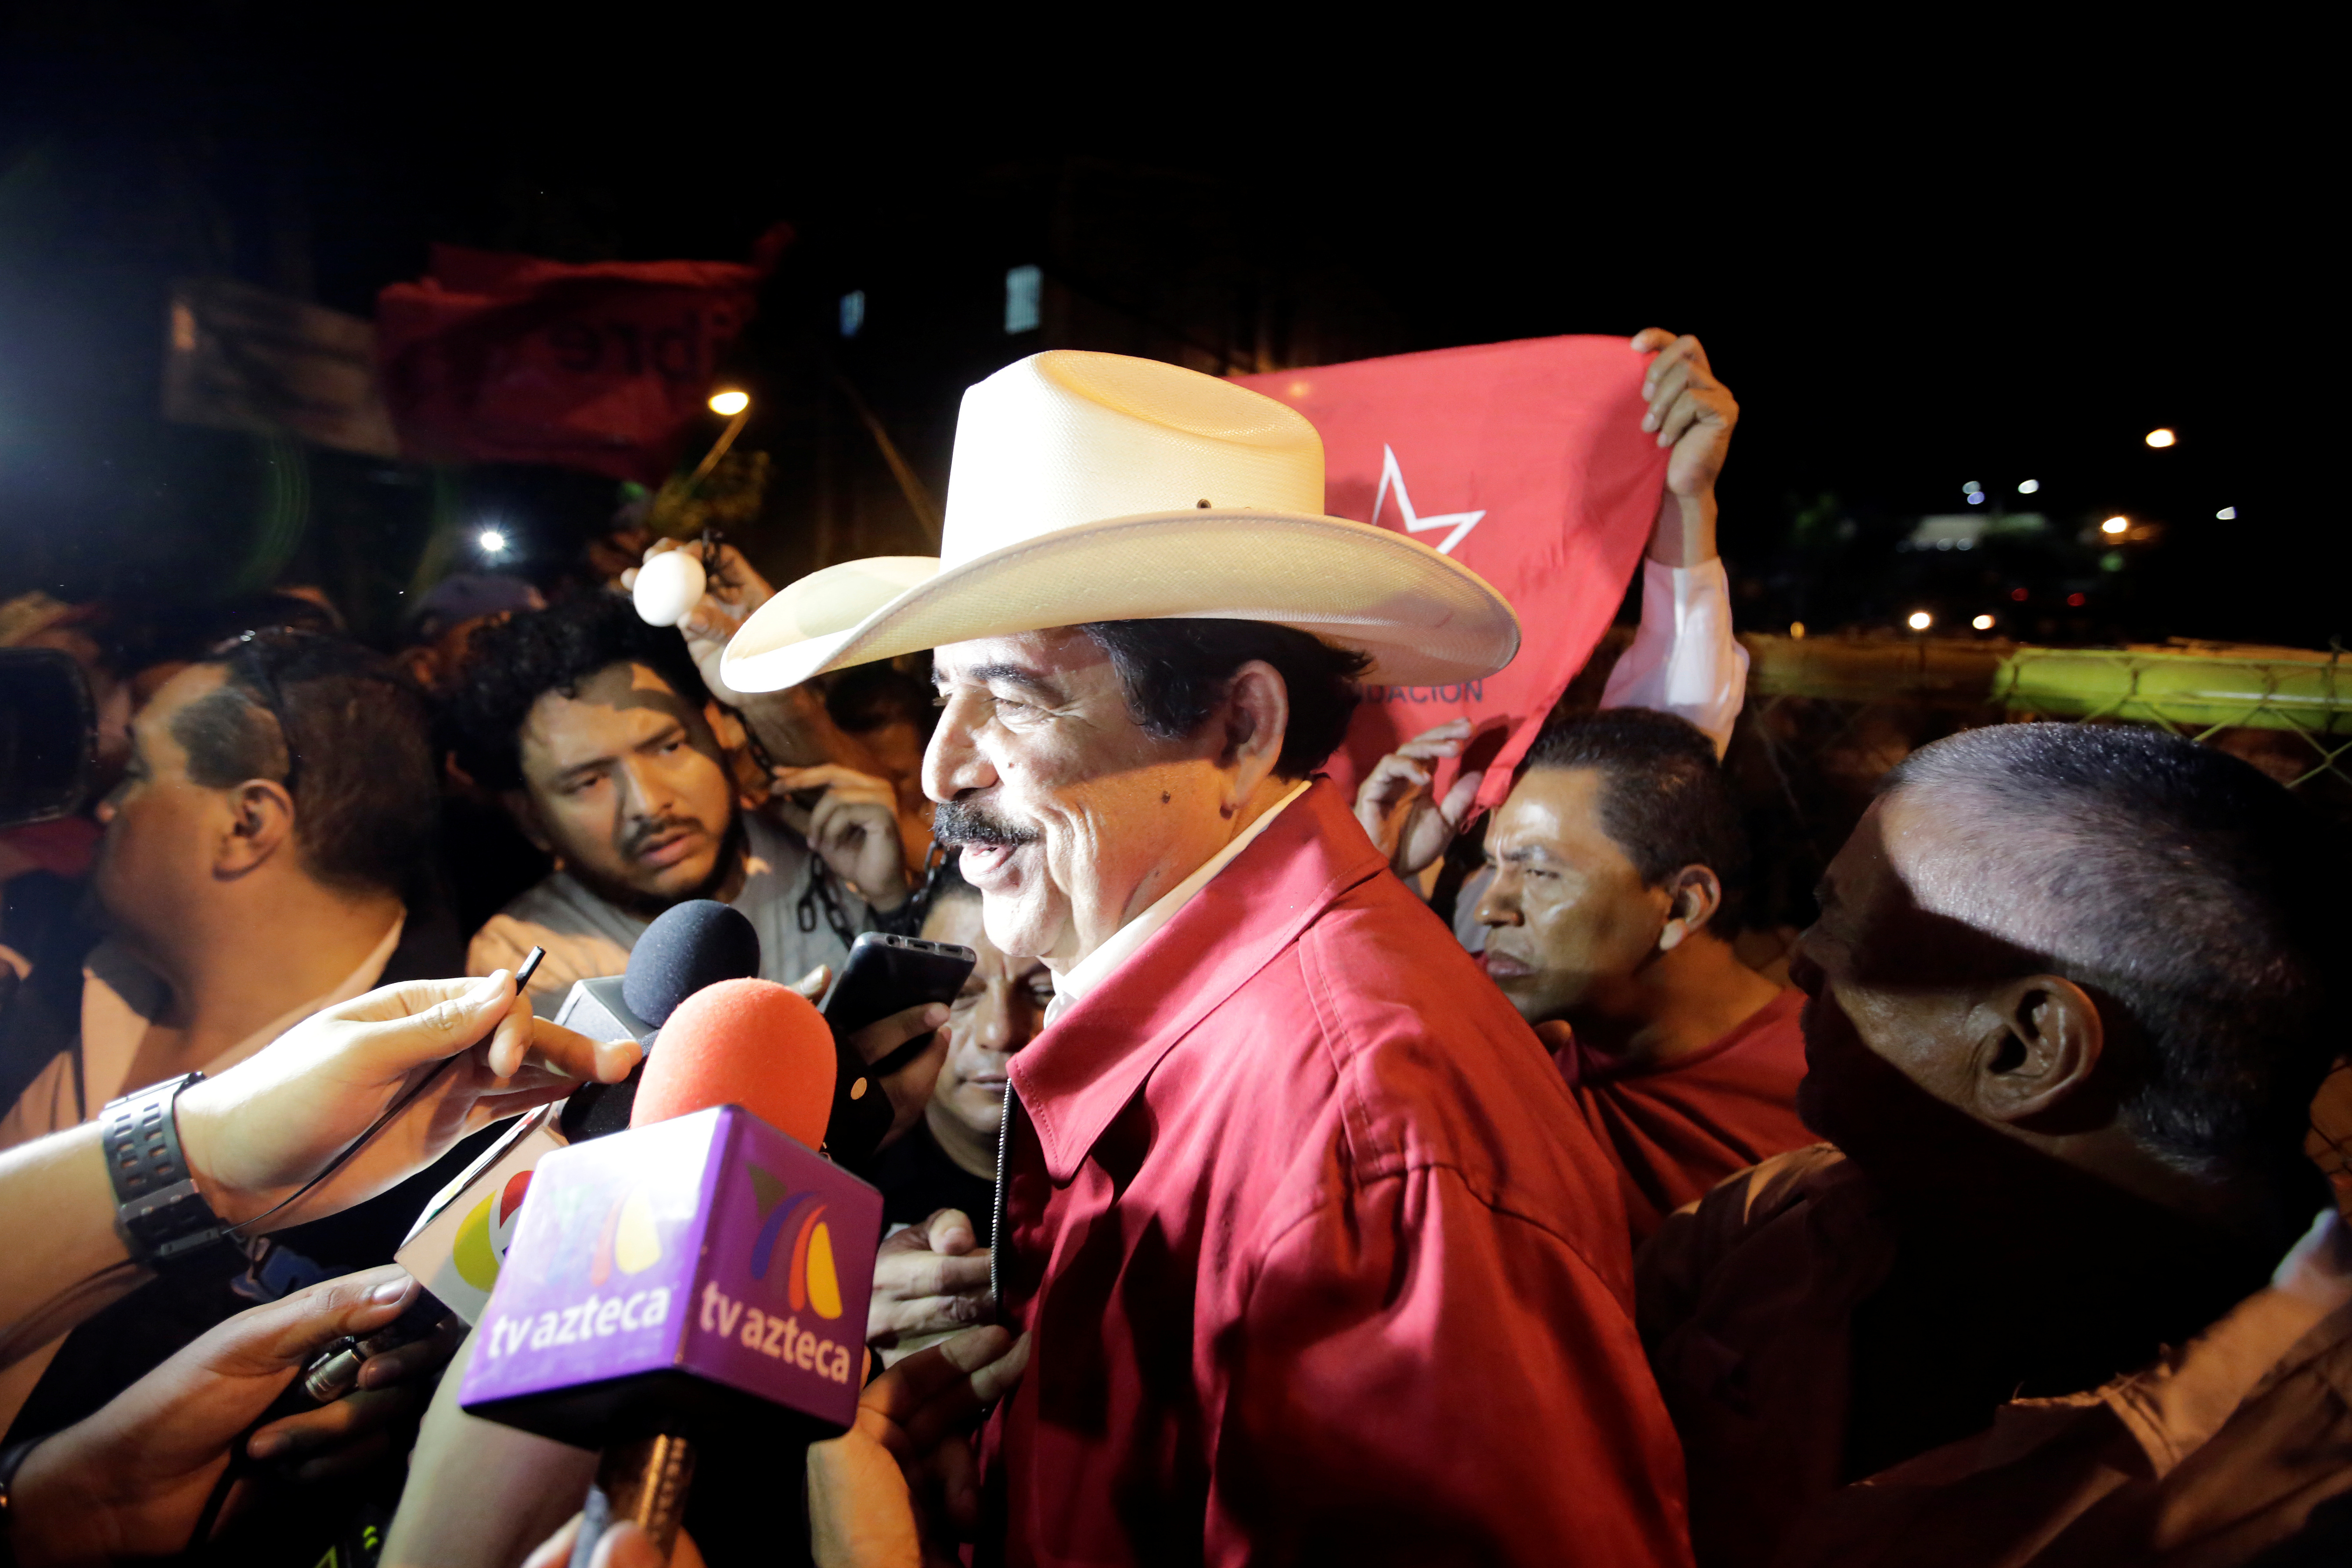 Honduras' former president Manuel Zelaya speaks to reporters during a protest to mark the first anniversary of a contested presidential election with allegations of electoral fraud, in Tegucigalpa